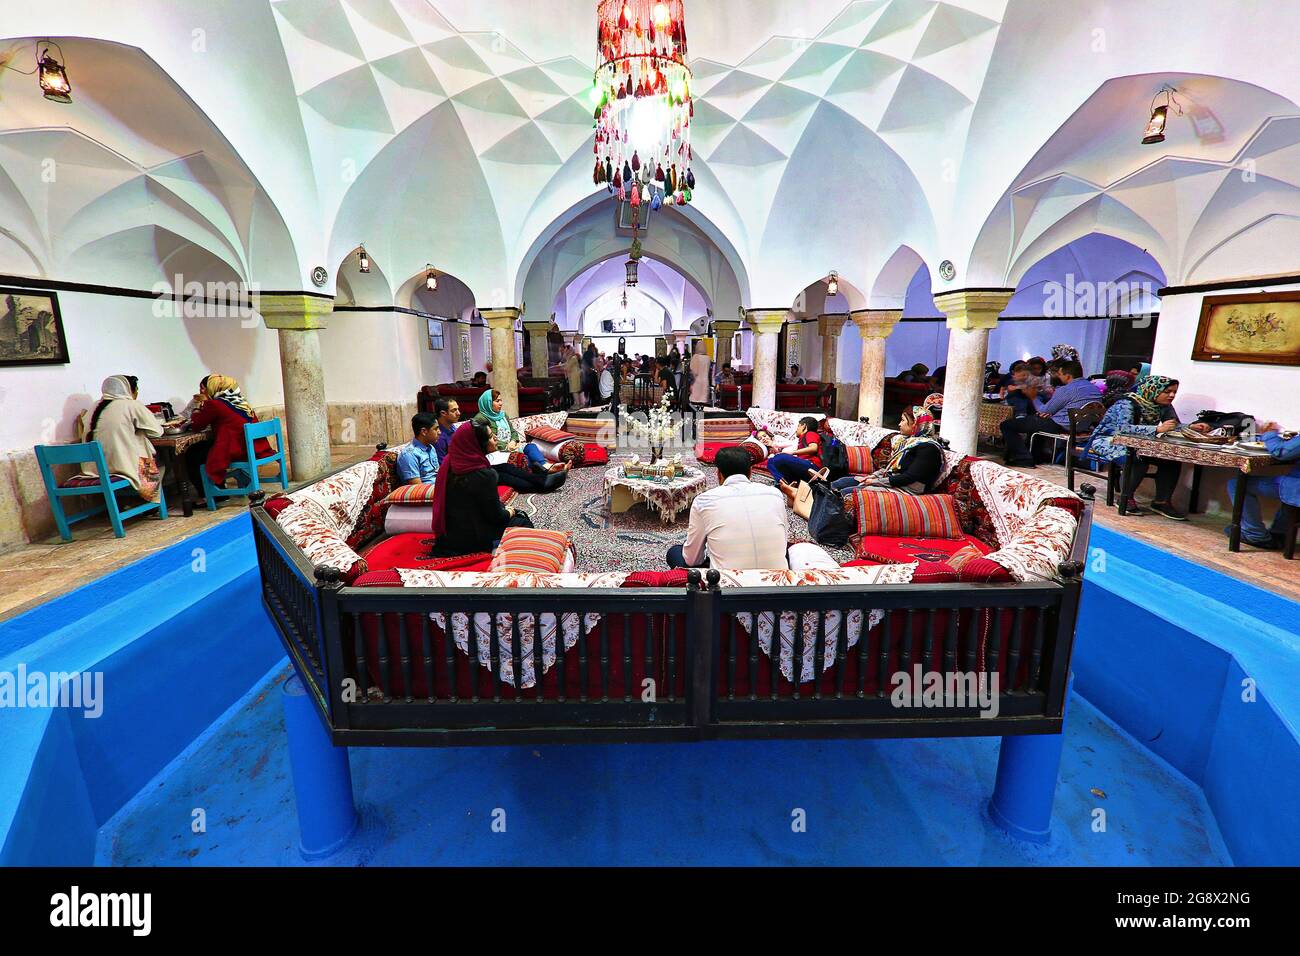 People eating in the restaurant converted from an historical bath in Kerman, Iran Stock Photo